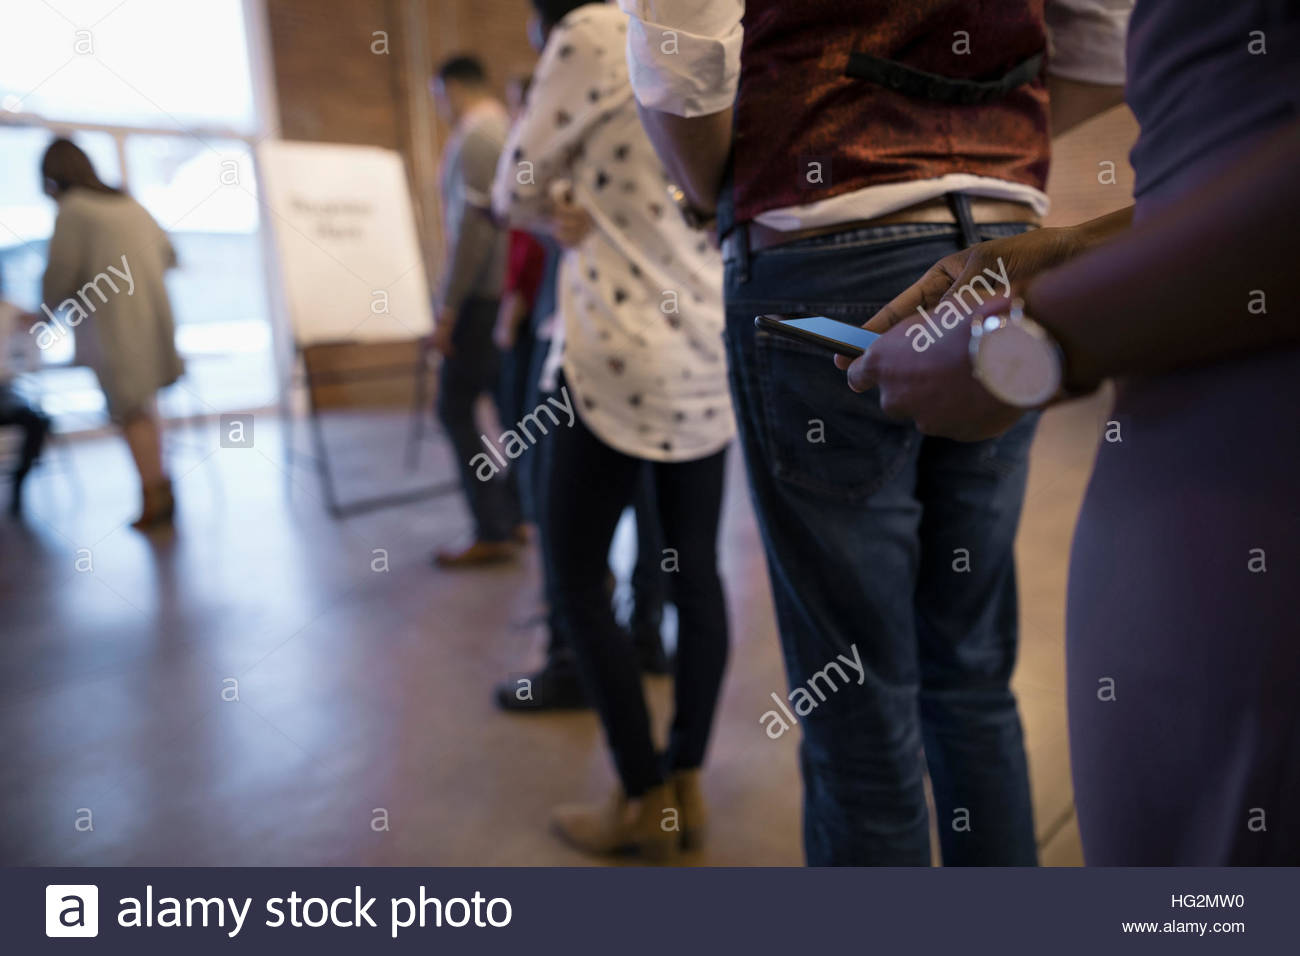 Business people waiting in registration queue texting with cell phone Stock Photo